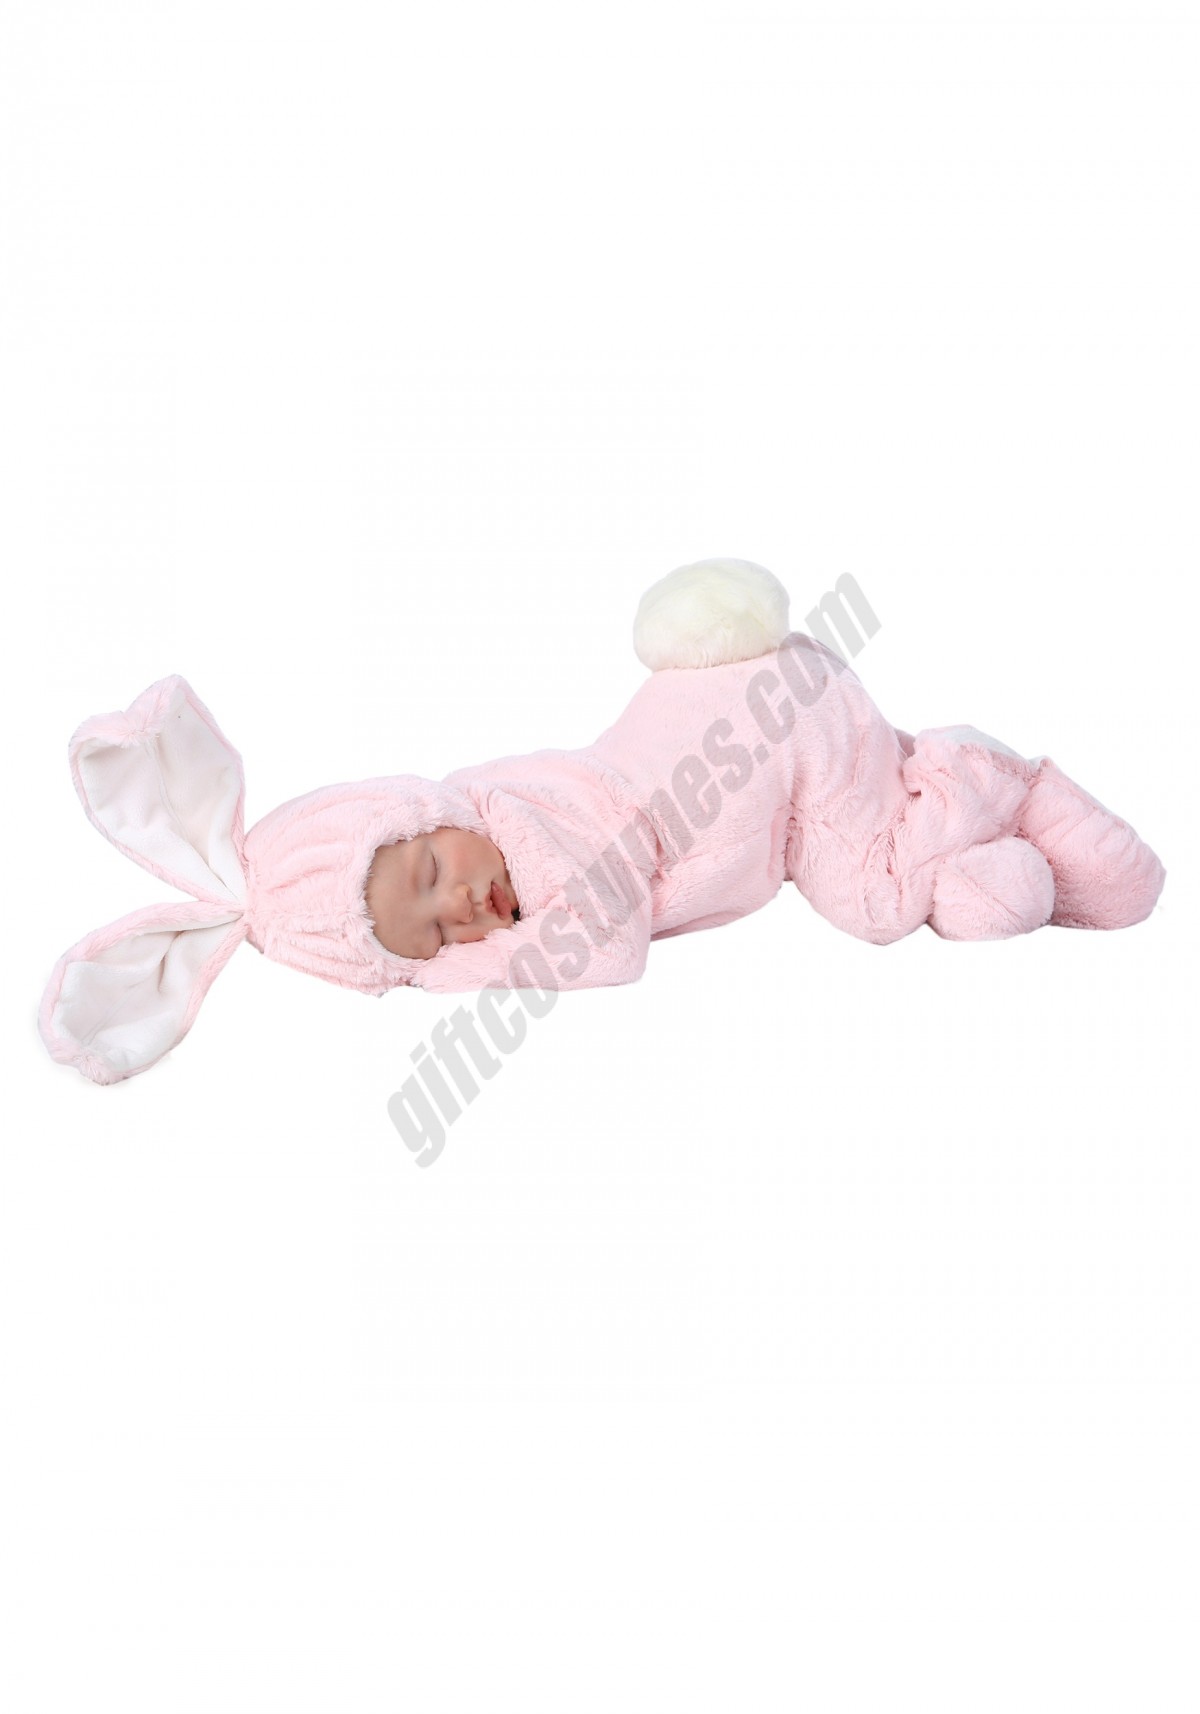 Infant Anne Geddes Bunny Costume Promotions - -0